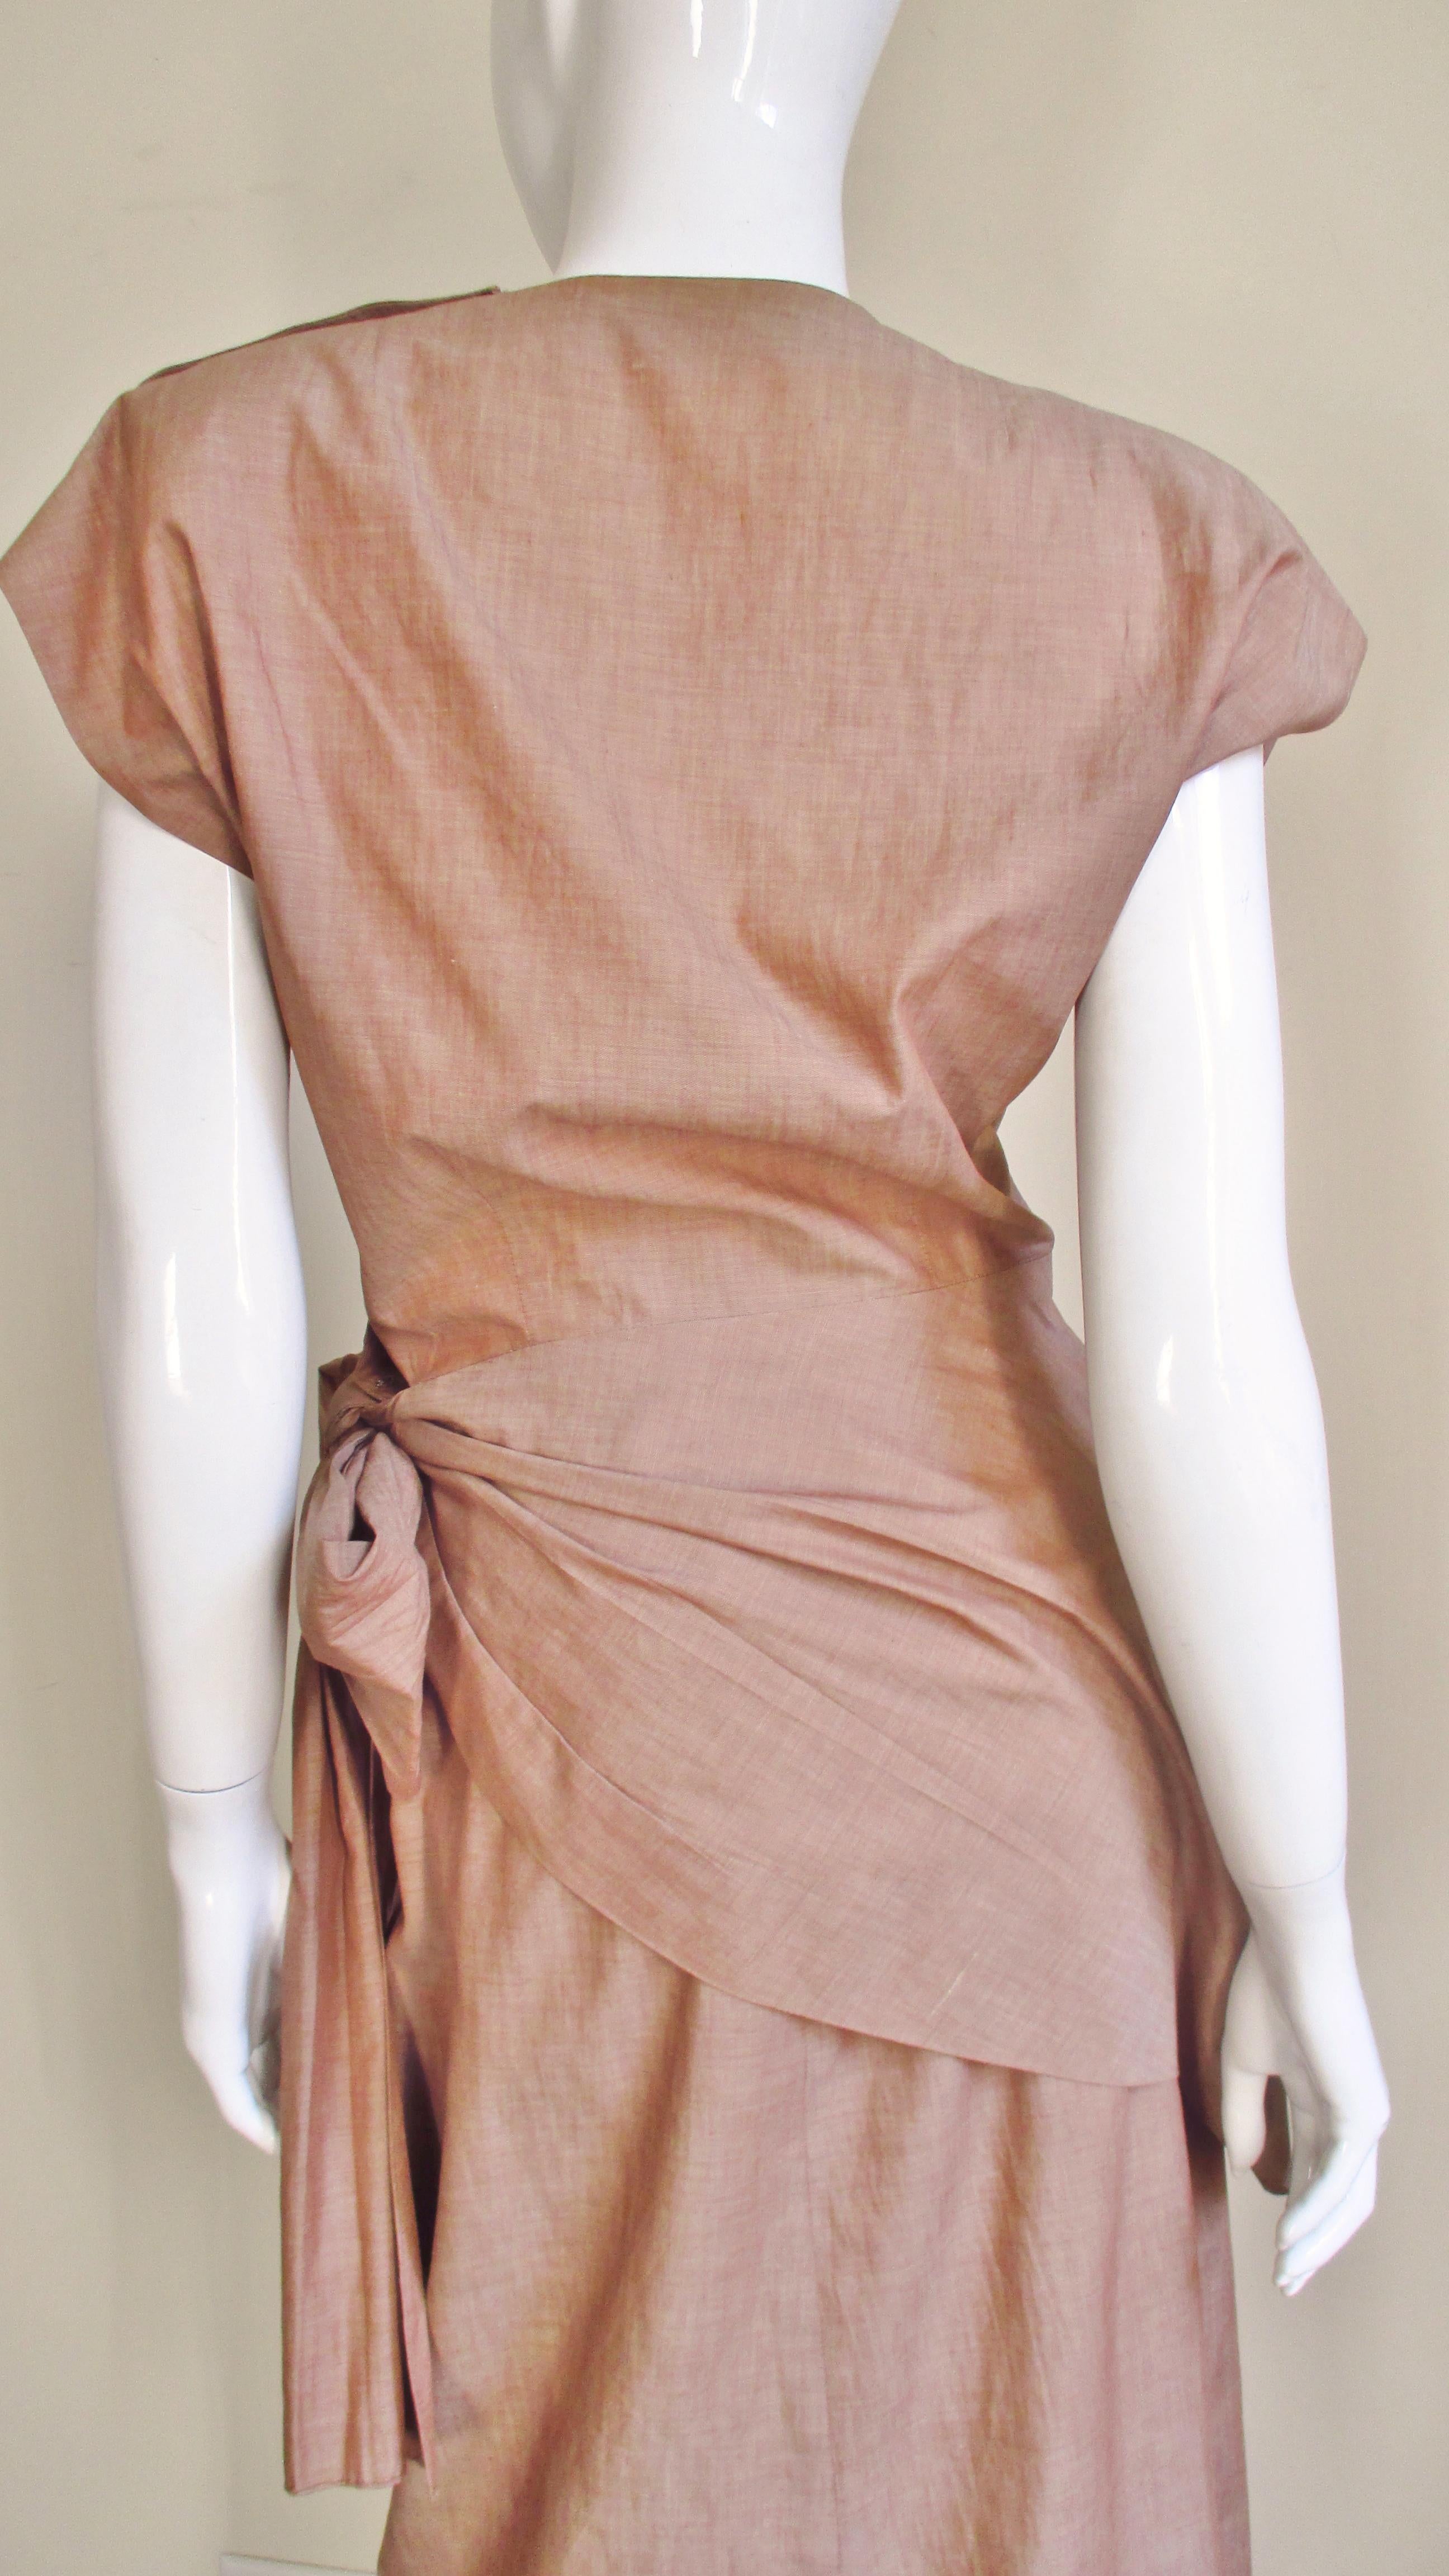  Adele Simpson 1940s Wrap Top and Skirt For Sale 4